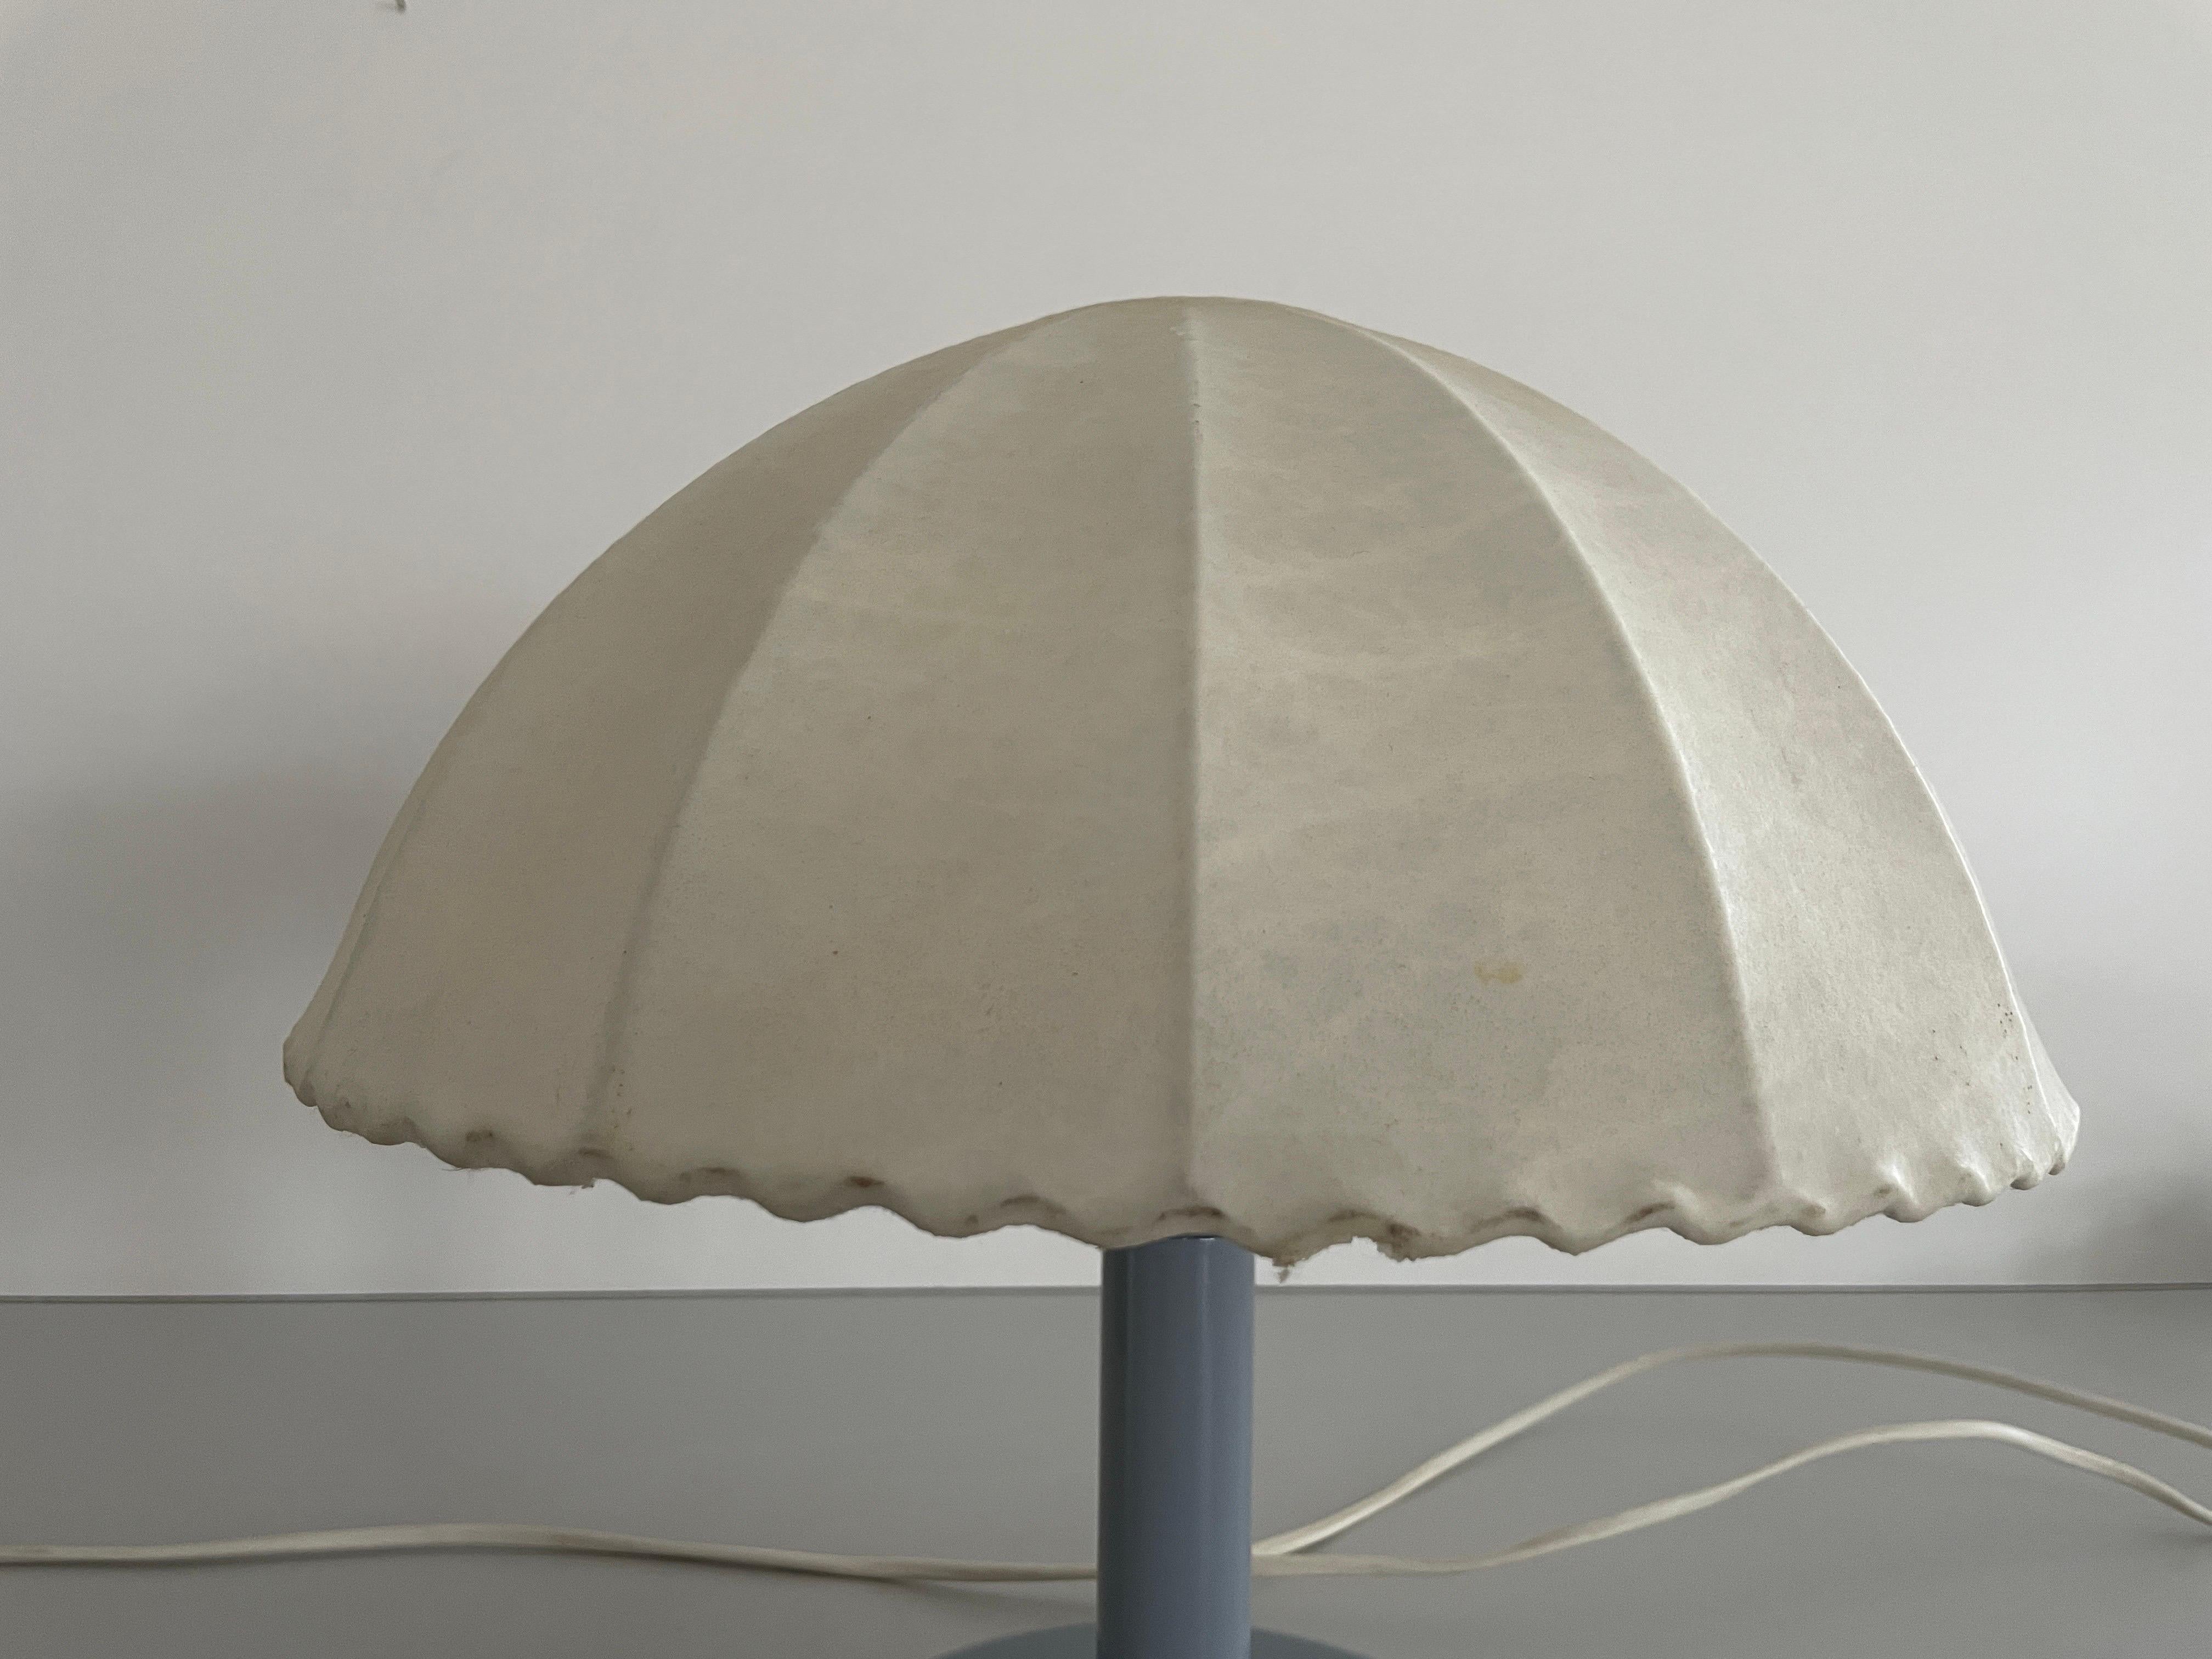 Pair of Cocoon Table Lamps with Grey Metal Base by GOLDKANT, 1960s, Germany For Sale 2